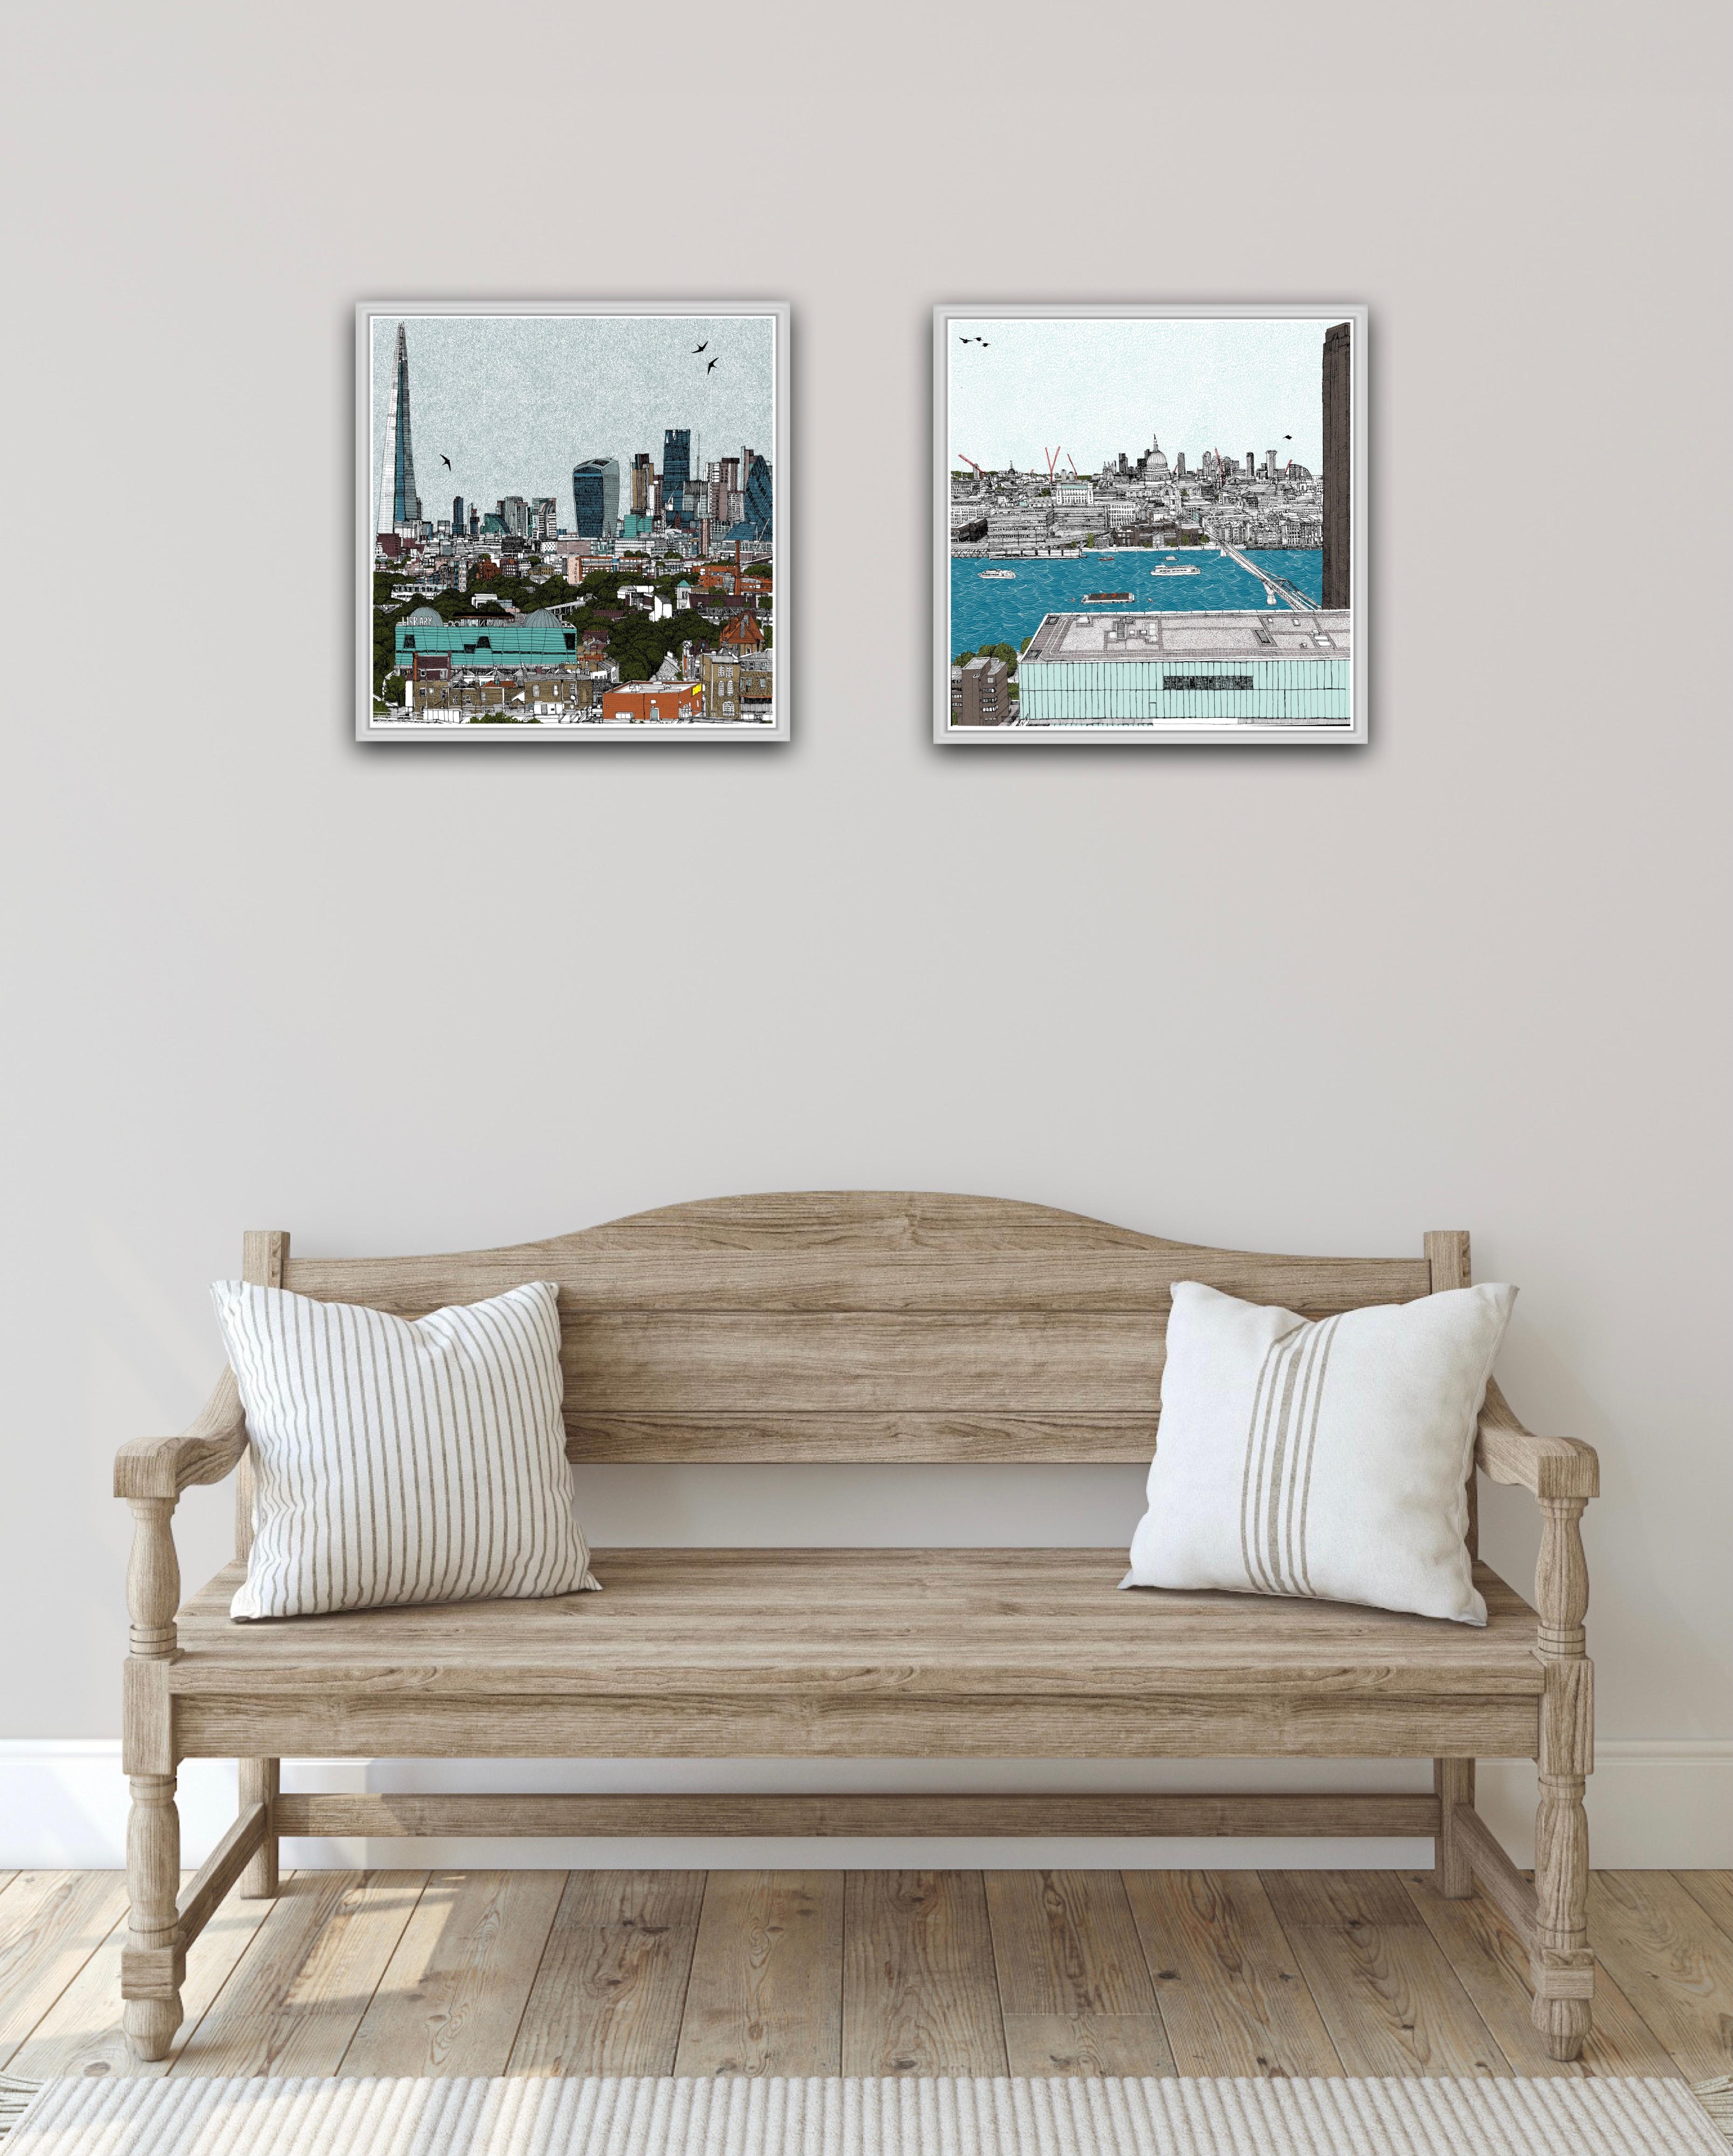 Switch Views, London and Living and Learning in London - Contemporary Print by Clare Halifax